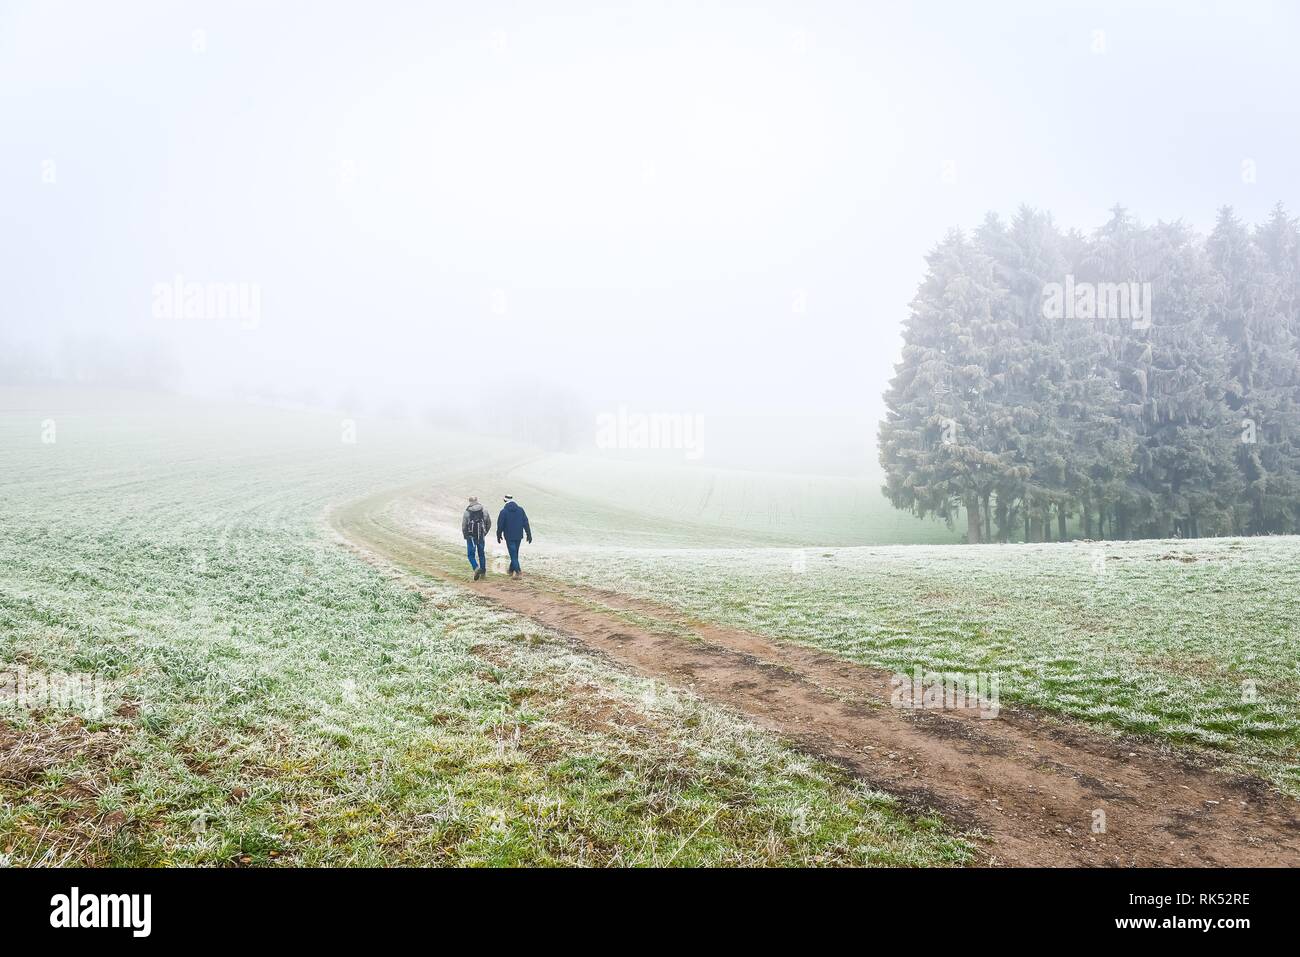 Two hikers on their way through fog landscape, Odenwald, Germany, Europe Stock Photo